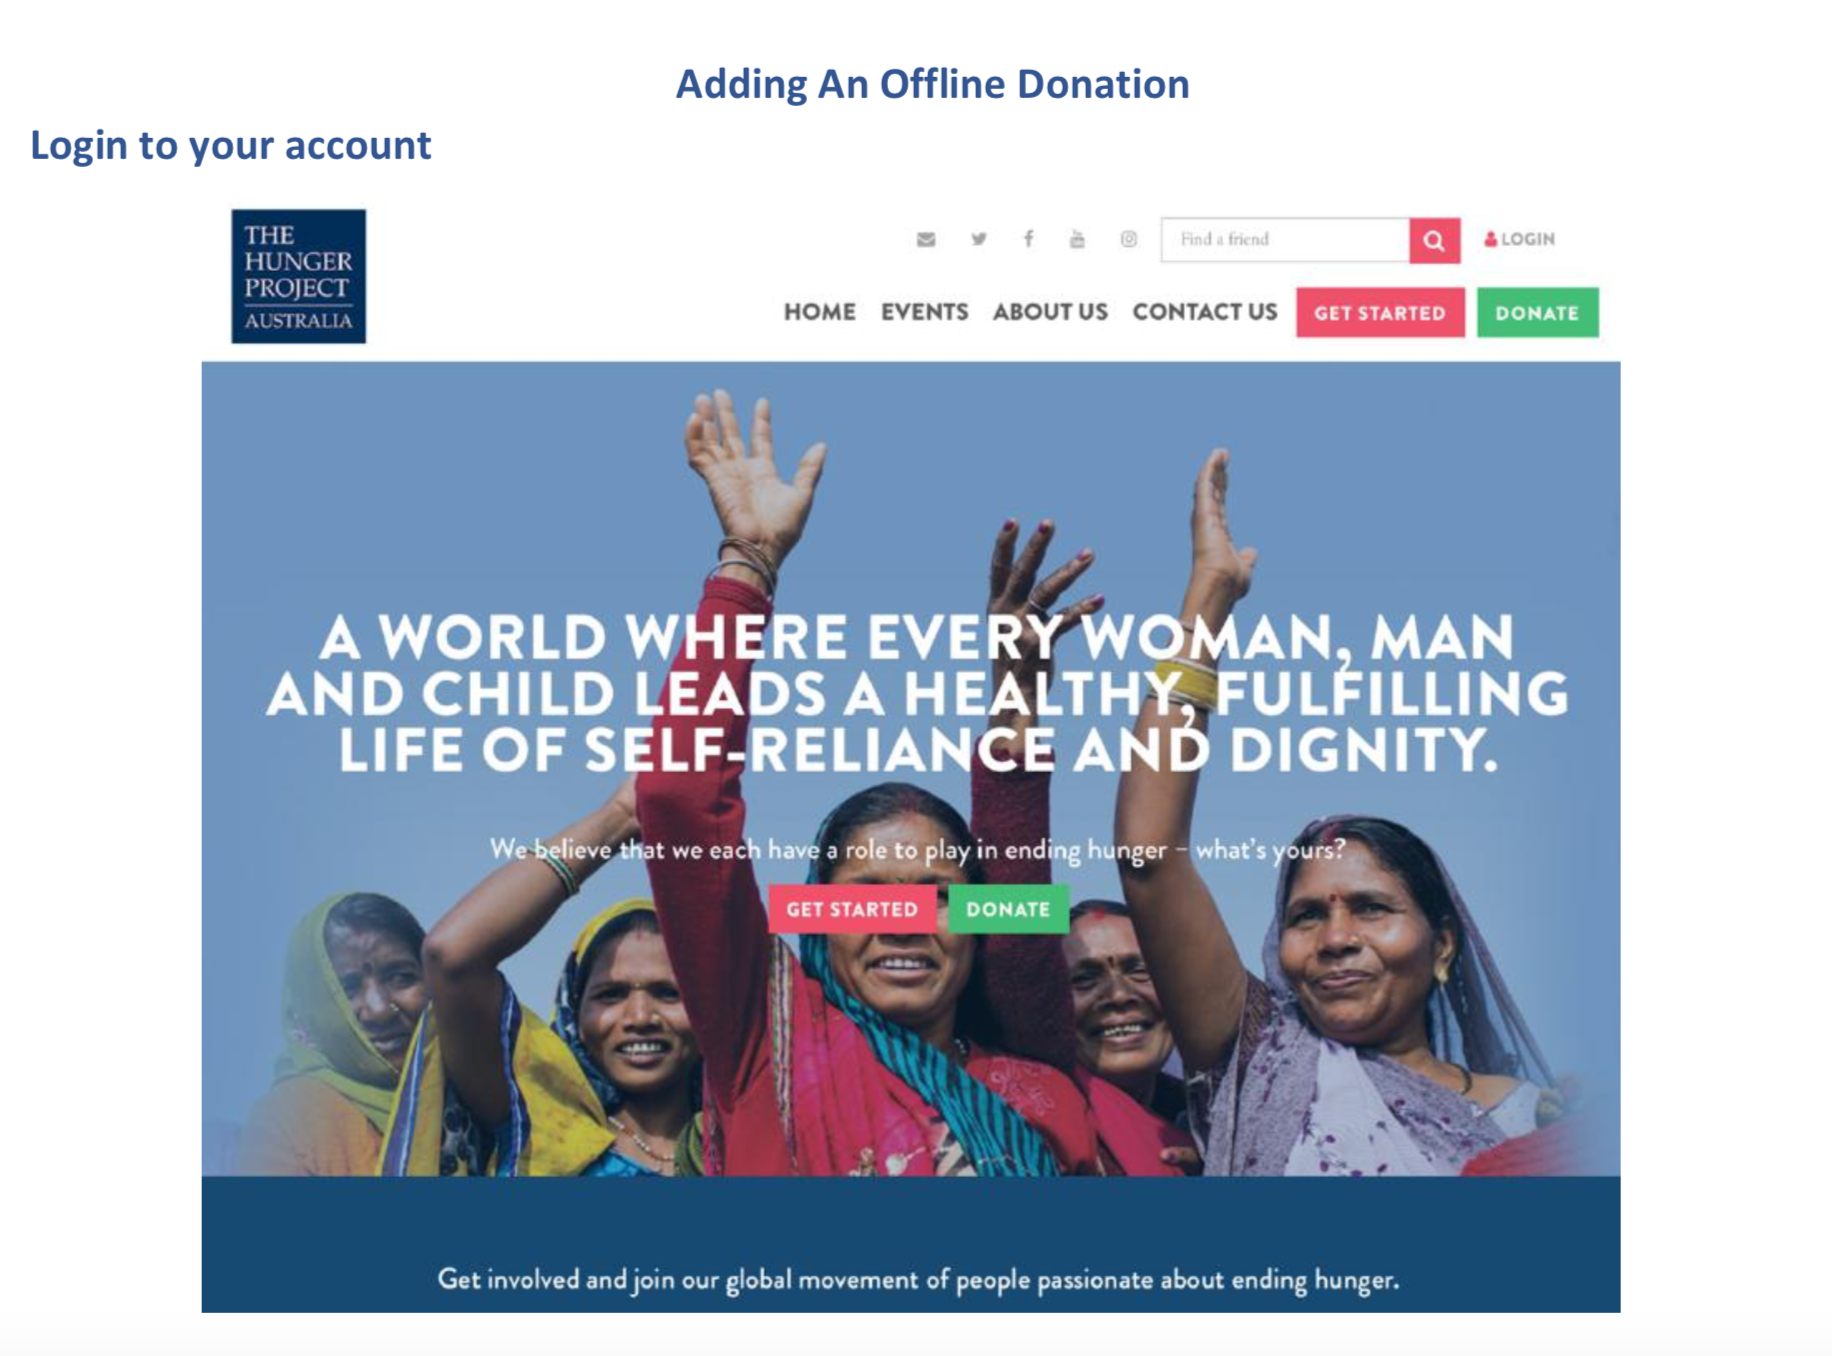 How to Make an Offline Donation